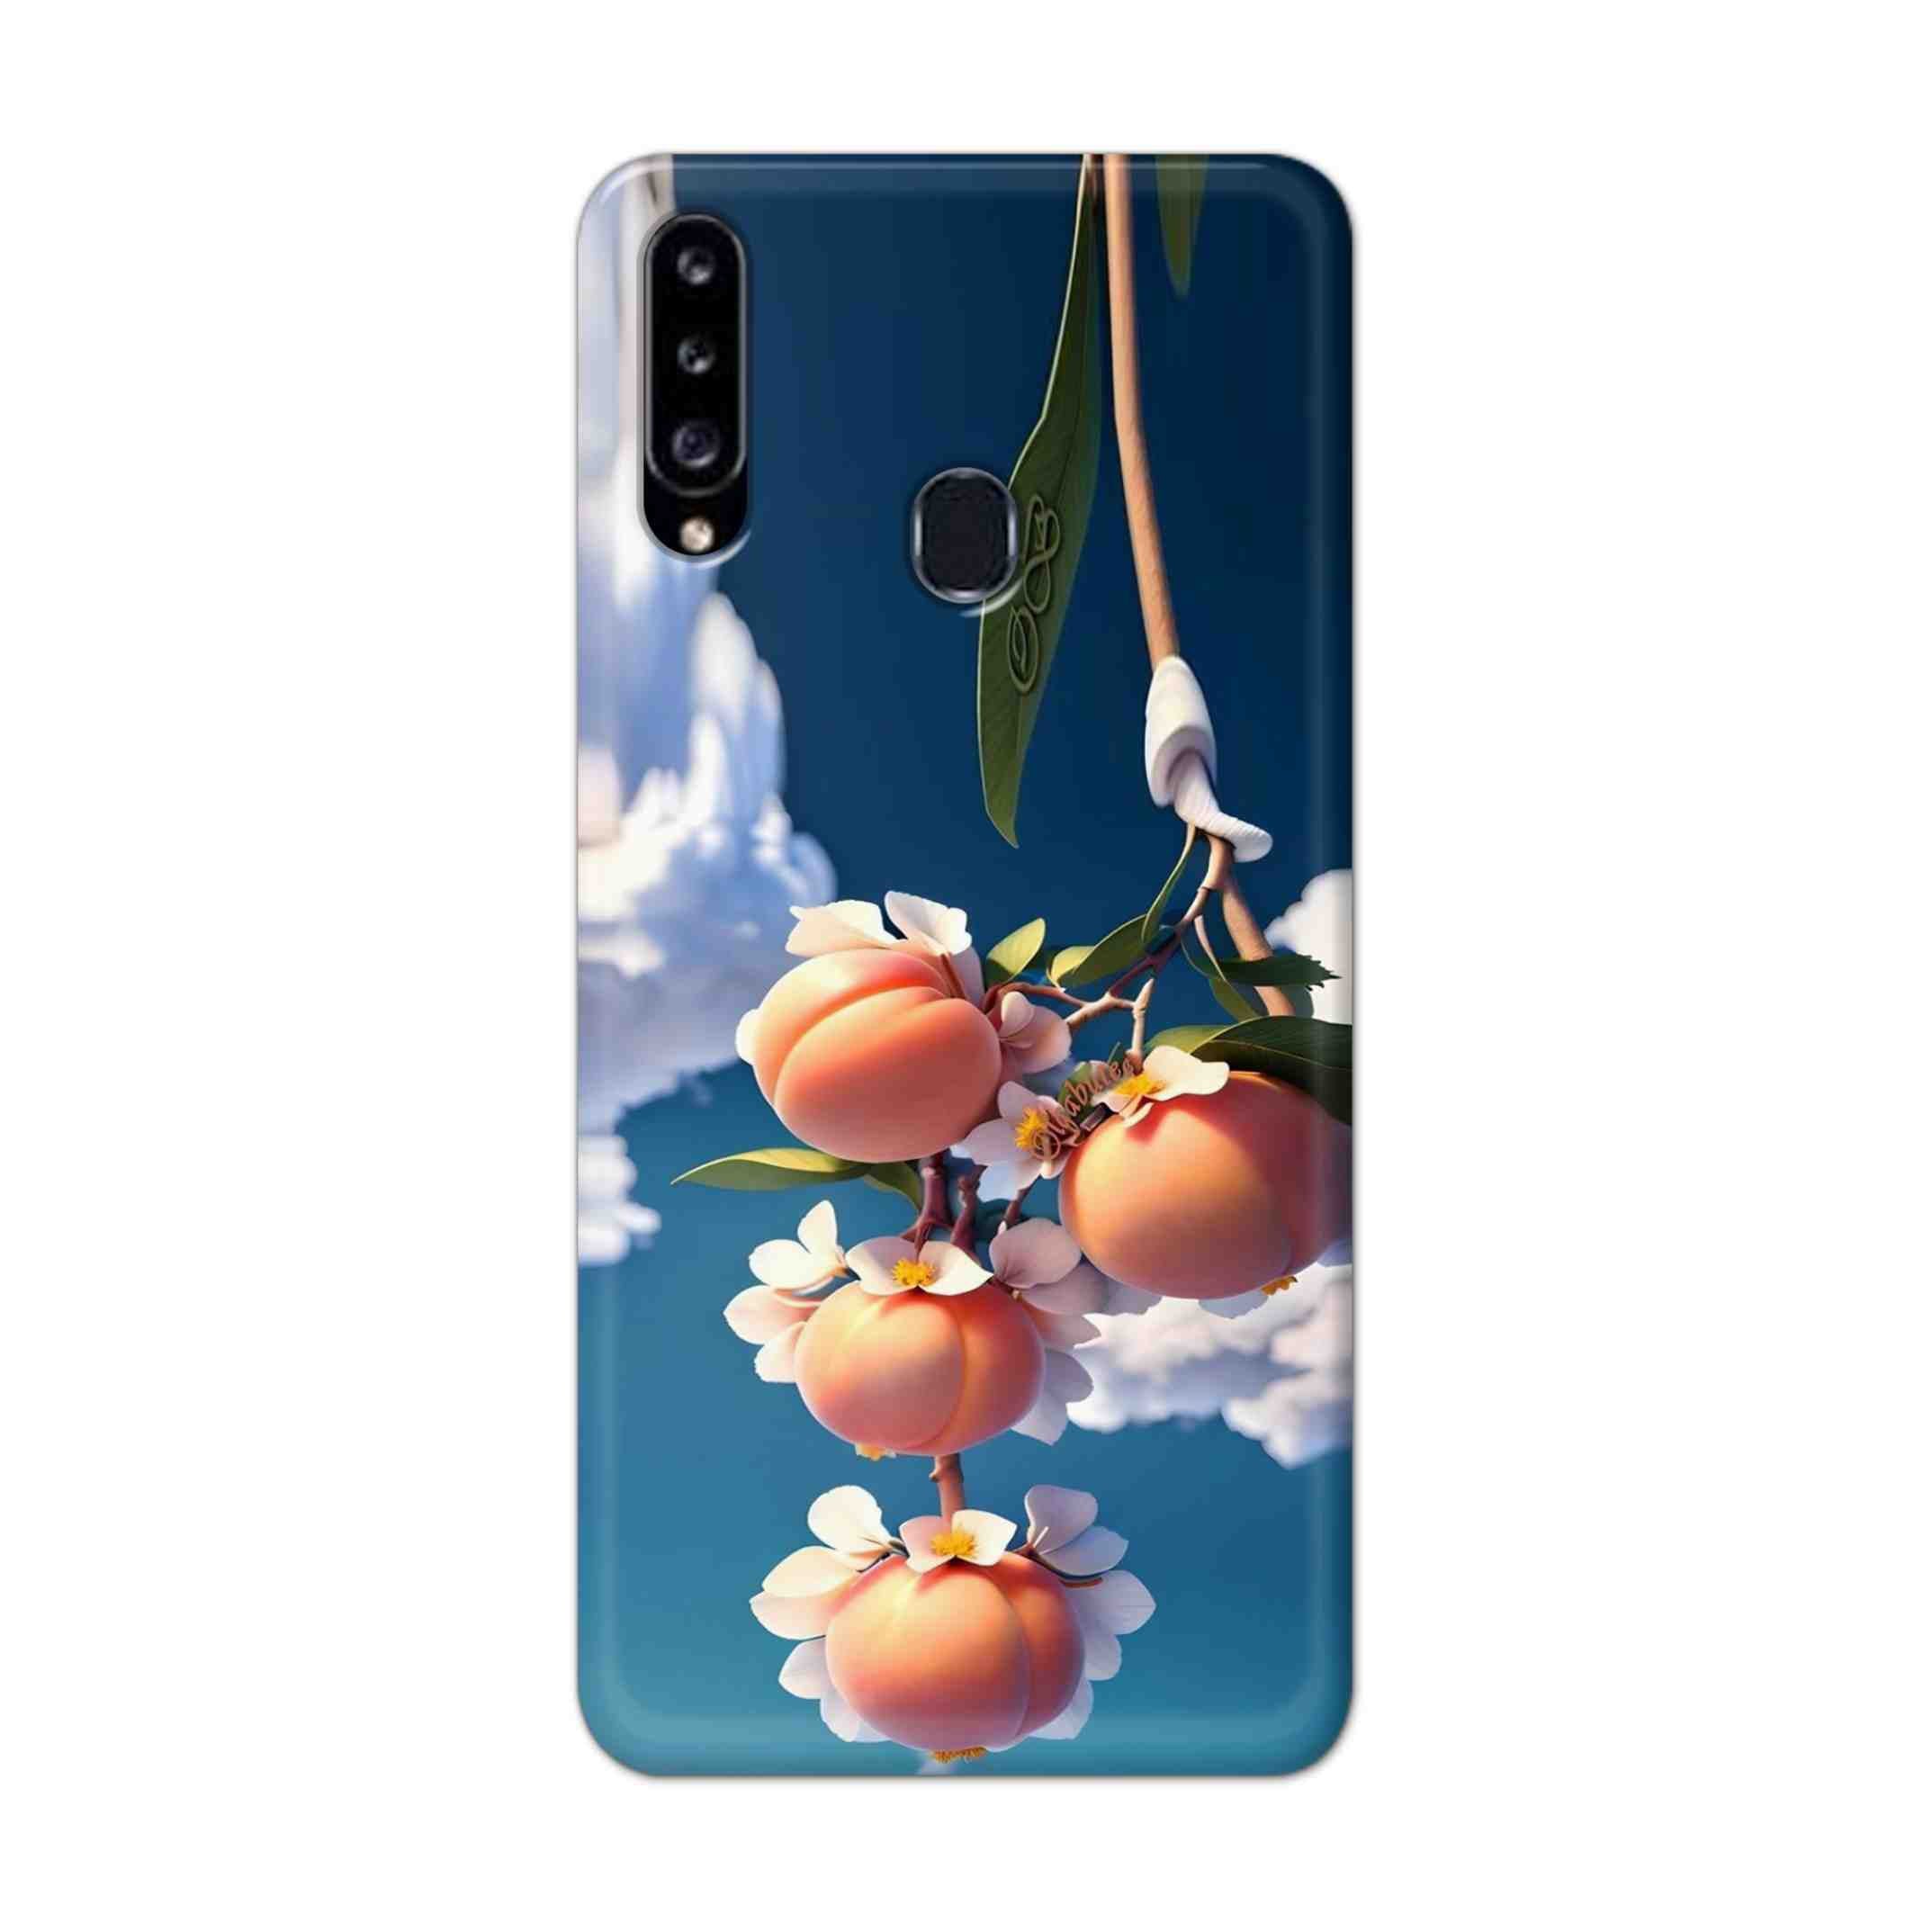 Buy Fruit Hard Back Mobile Phone Case Cover For Samsung Galaxy A21 Online